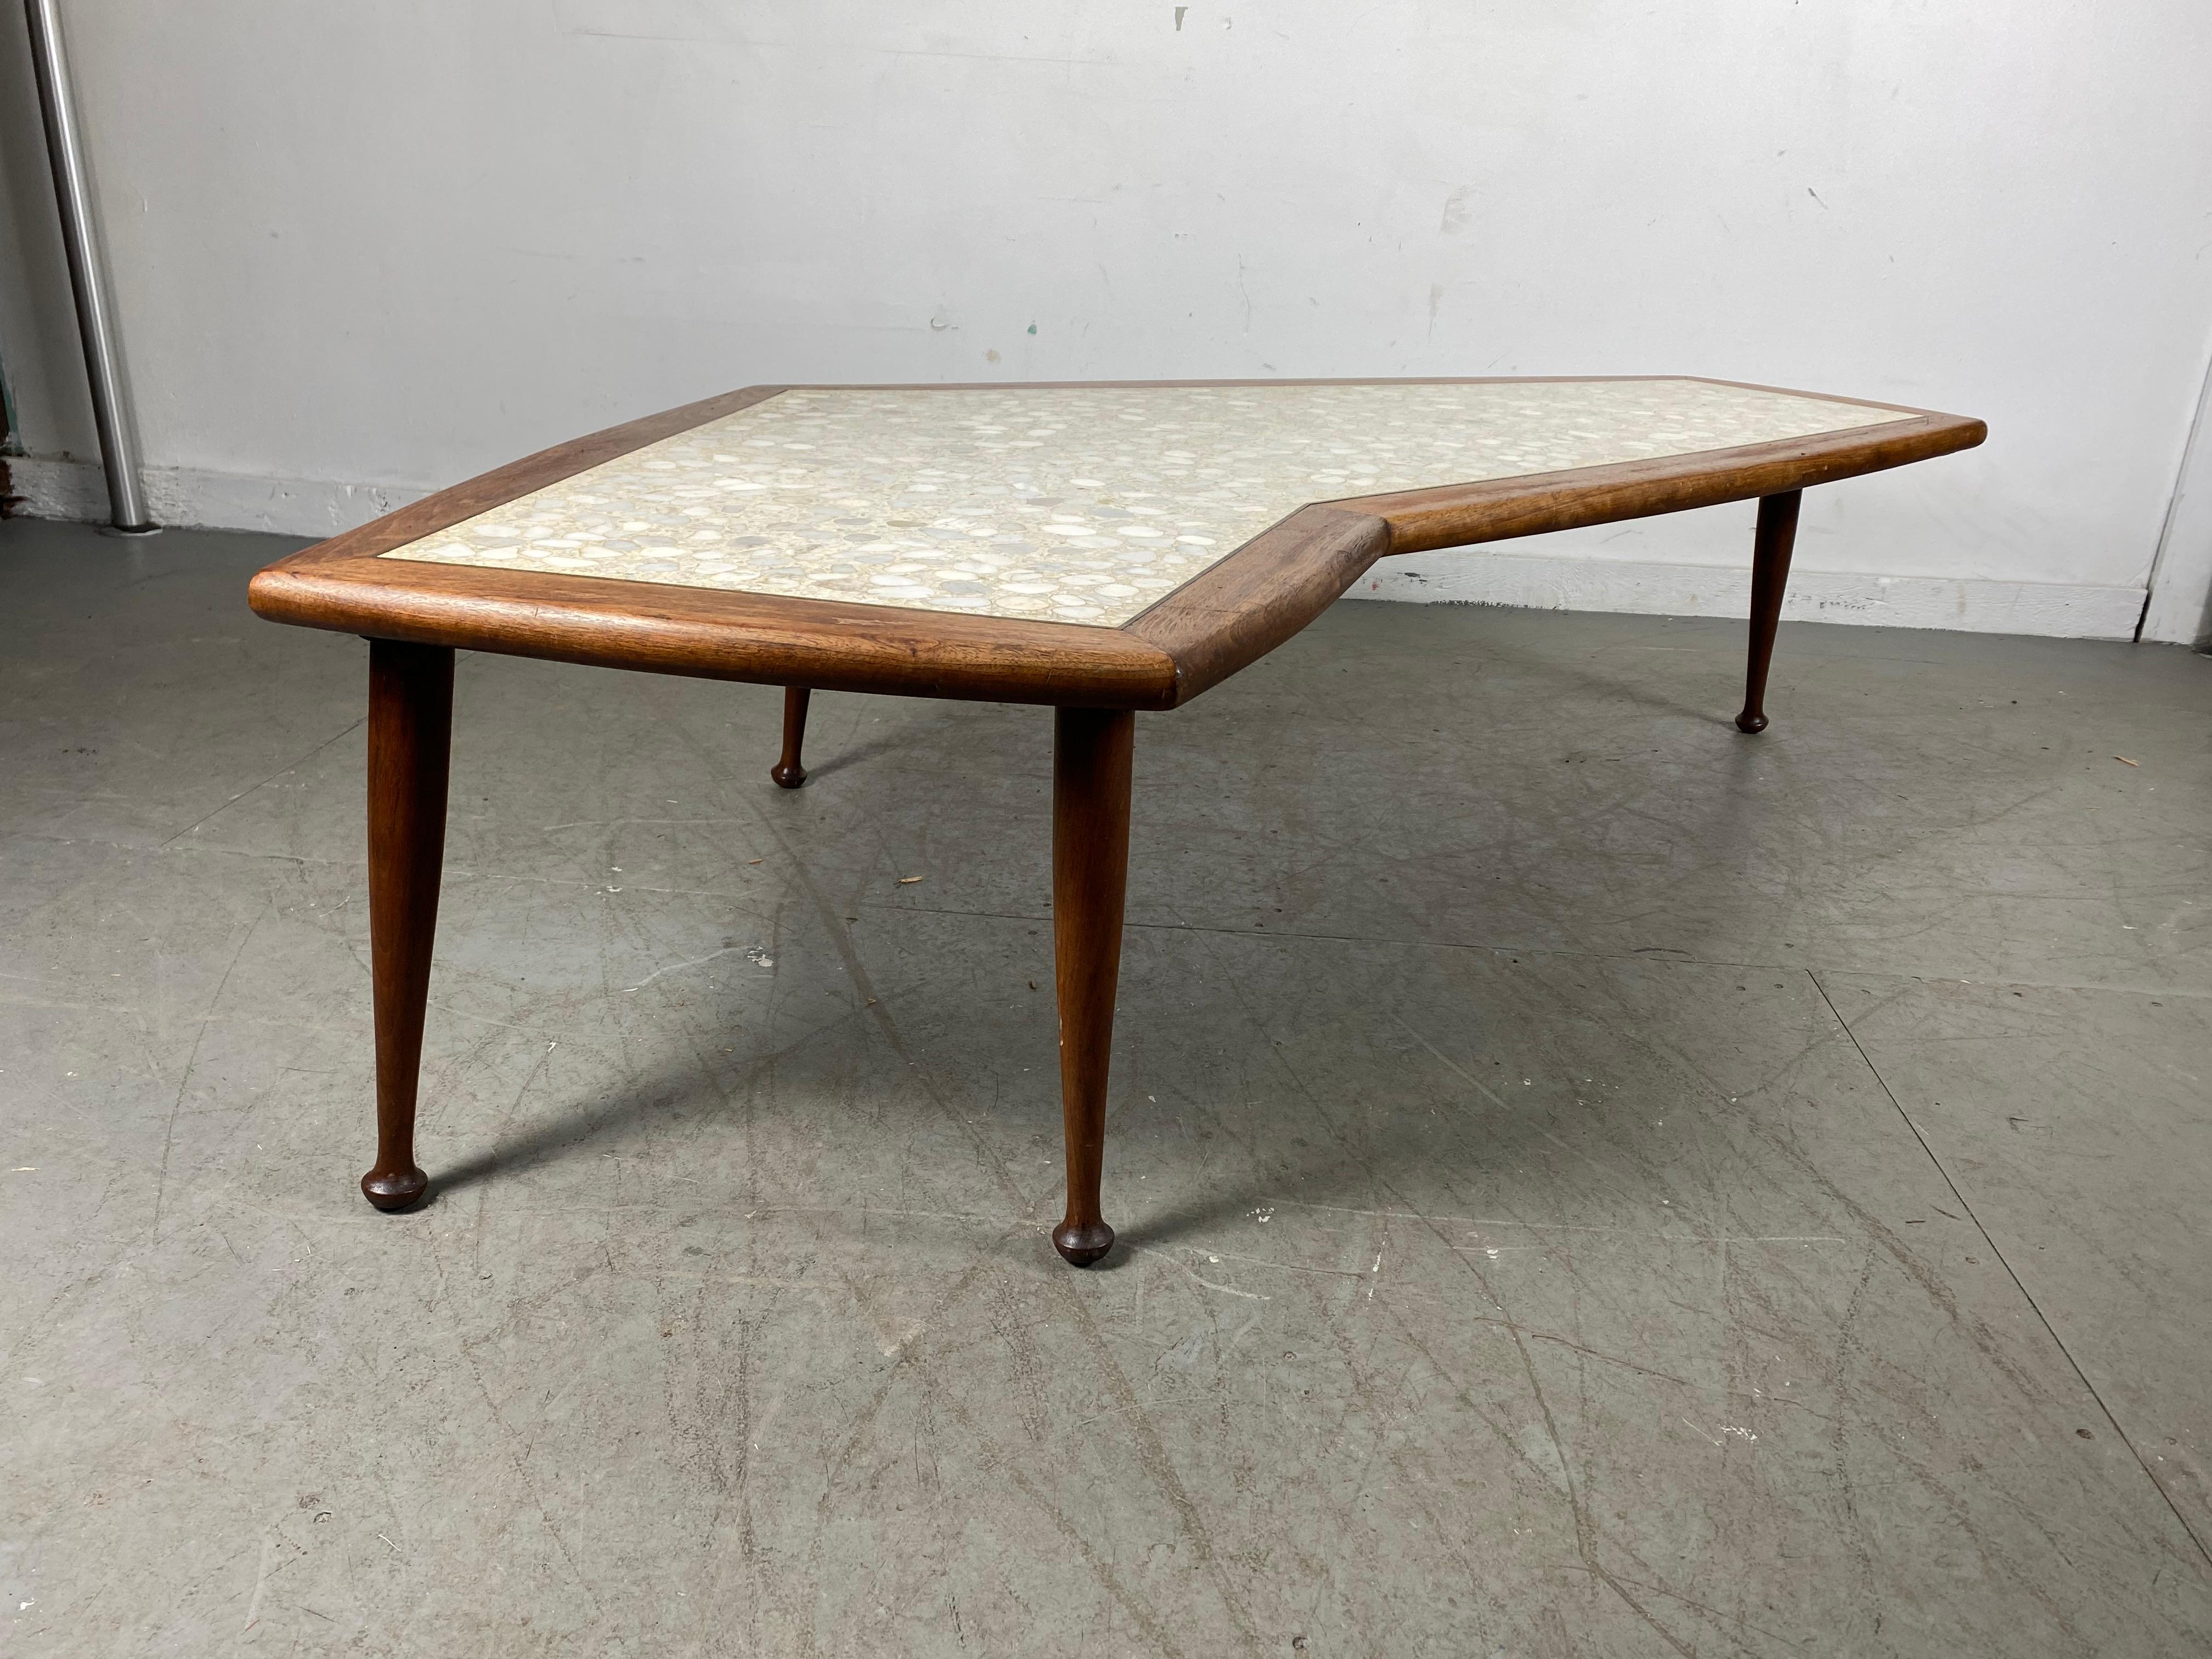 Classic American modernist walnut and inlay stone boomerang coffee/ cocktail table, solid walnut frame, wonderful variety of mixed stone, handsome design, unusual foot detail, retains original finish, patina, age appropriate wear, hand delivery